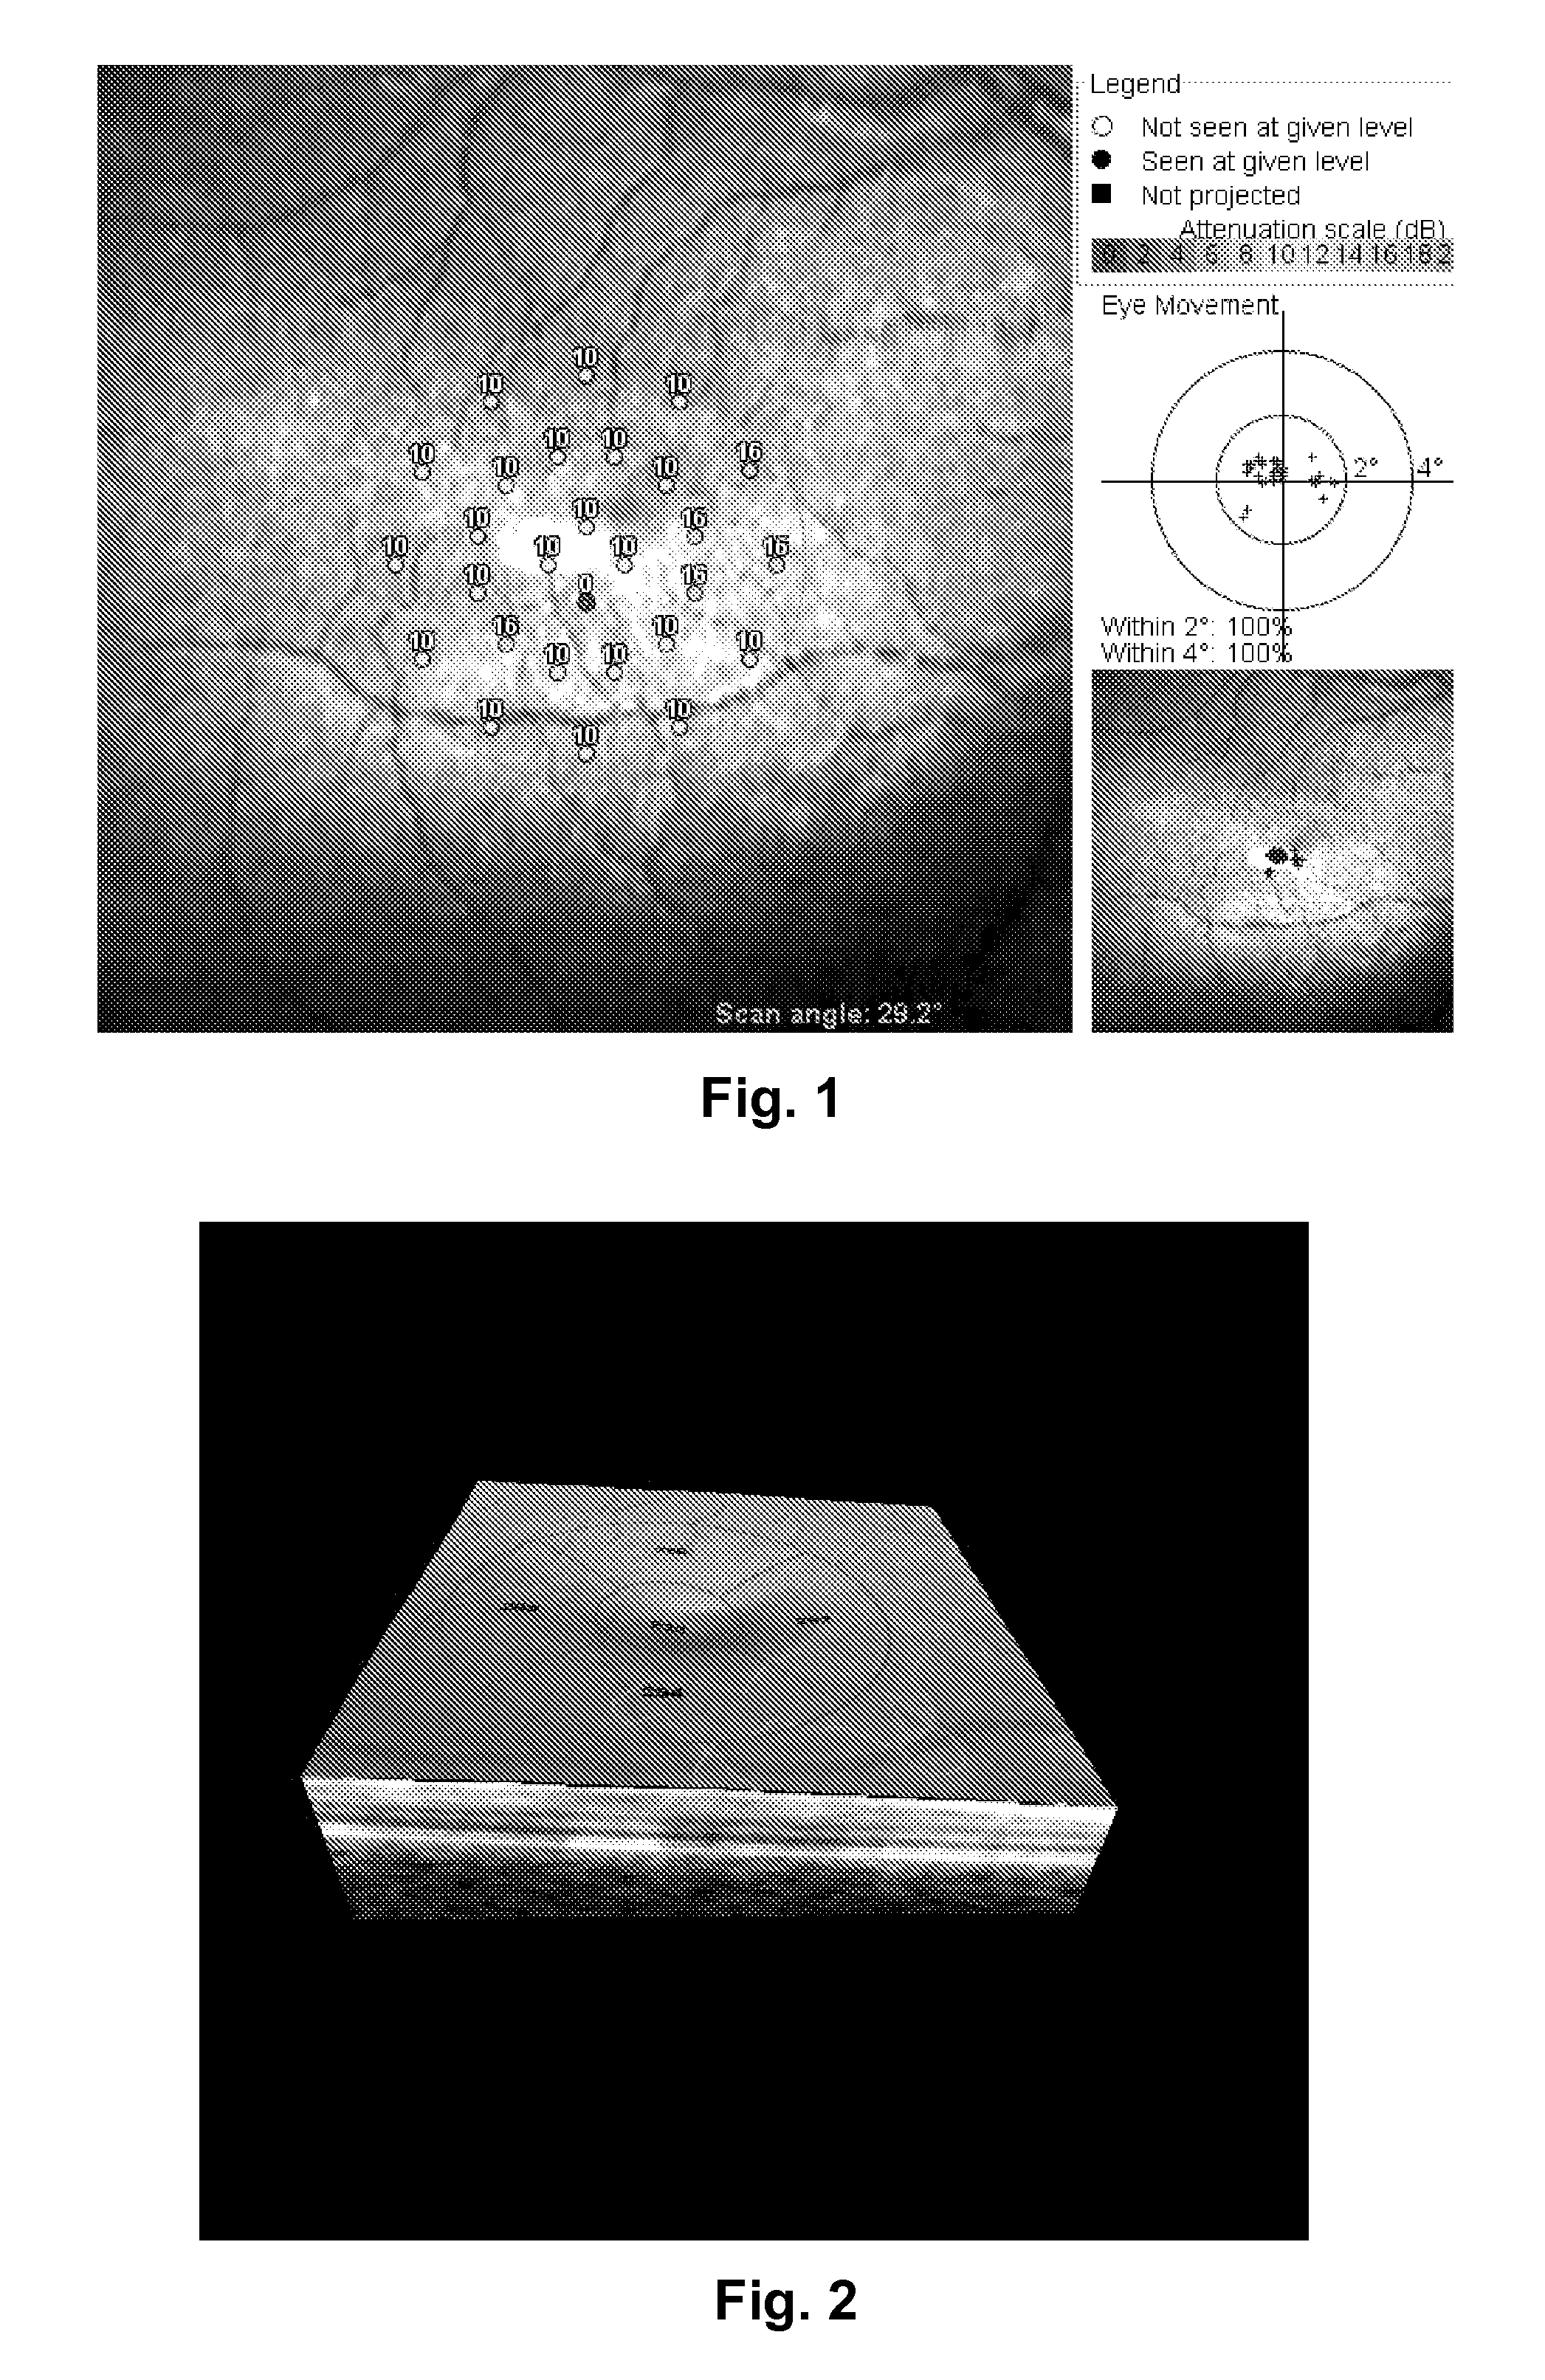 Method for Performing Micro-Perimetry and Visual Acuity Testing